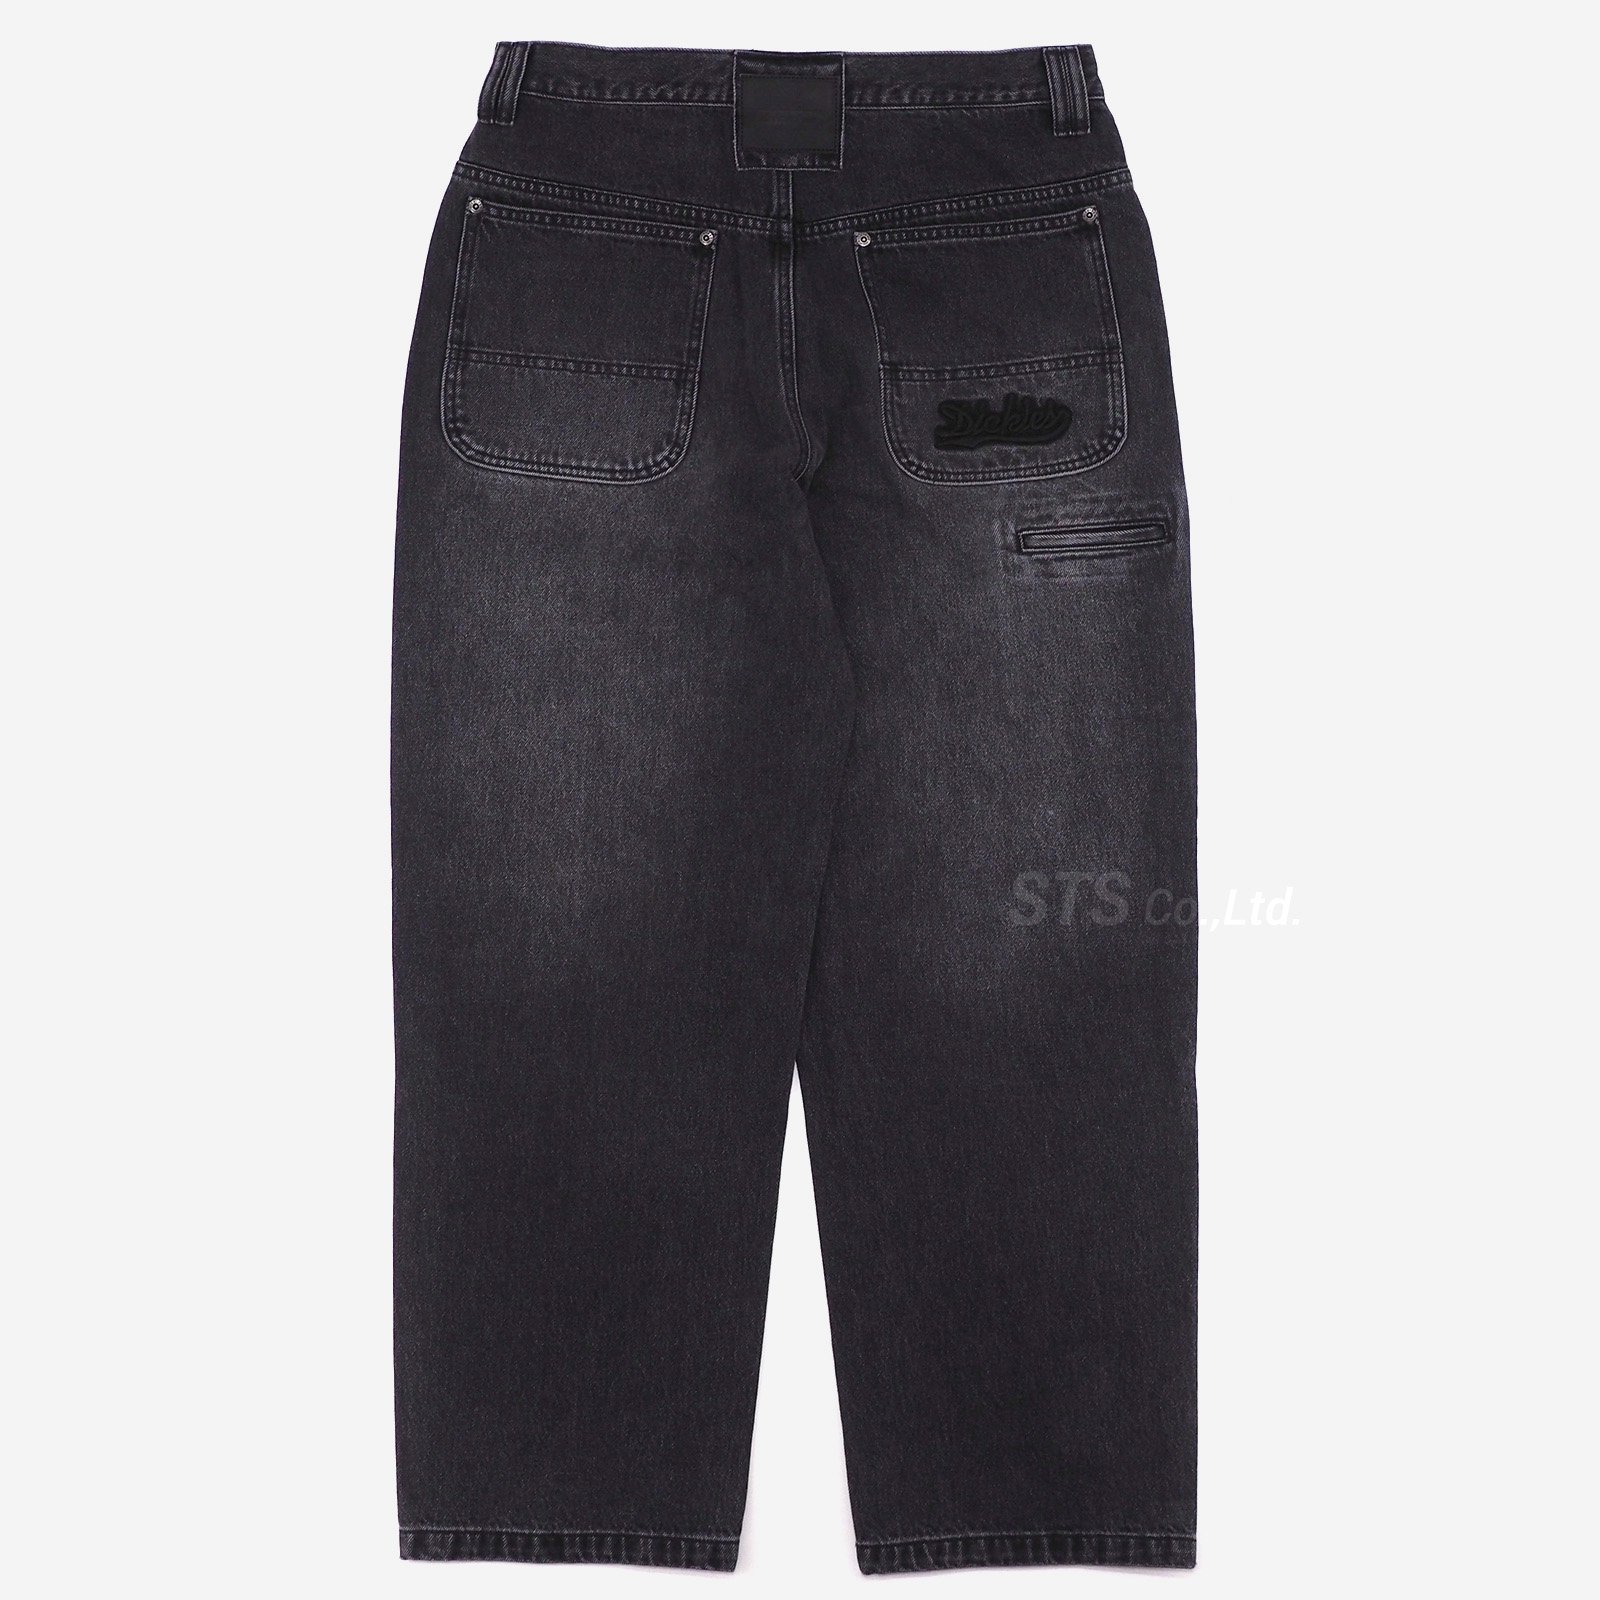 Supreme/Dickies Double Knee Baggy Jean | ディッキーズとのコラボ 